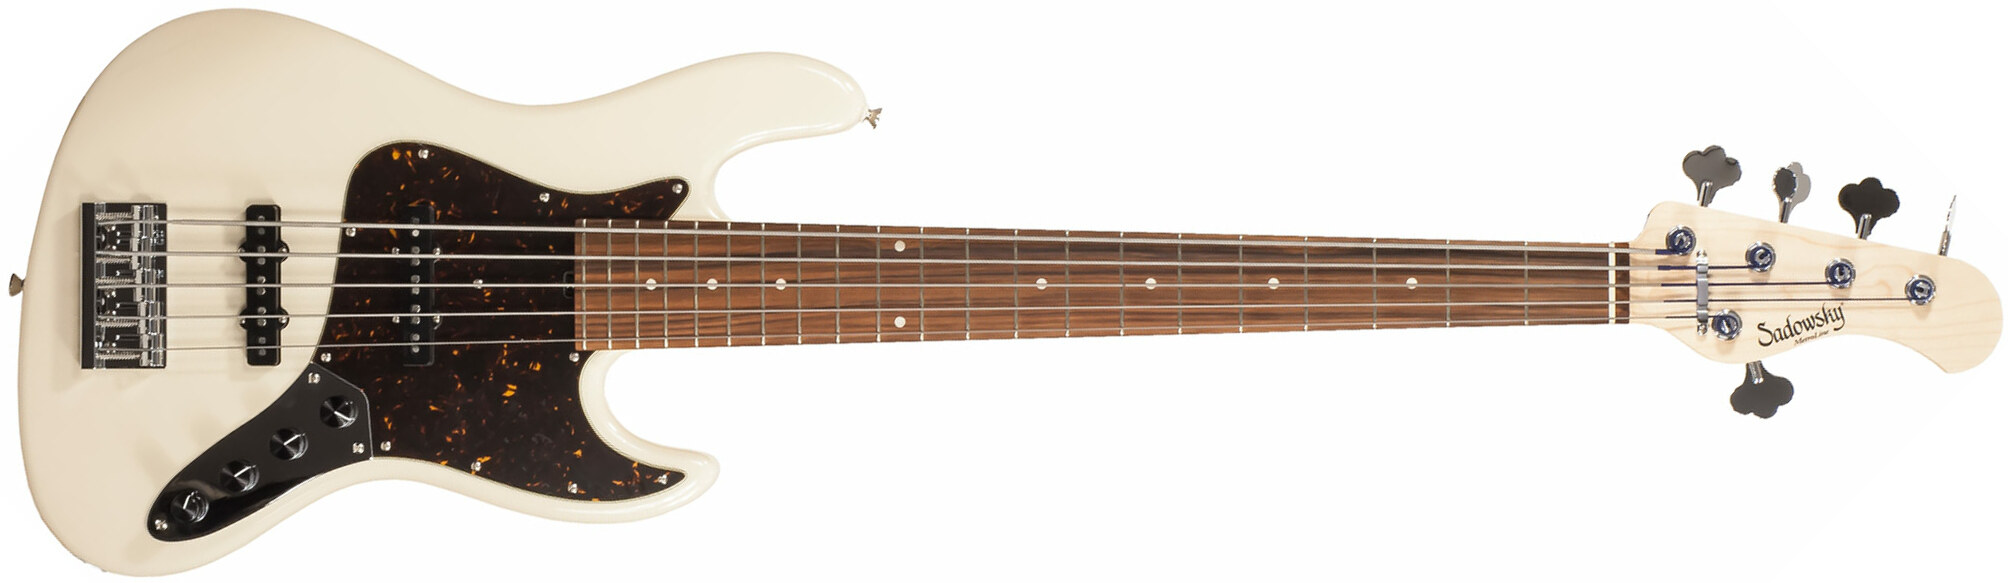 Sadowsky Rv5 Metroline 21 Fret Vintage Japon Rw - Olympic White - Solid body electric bass - Main picture